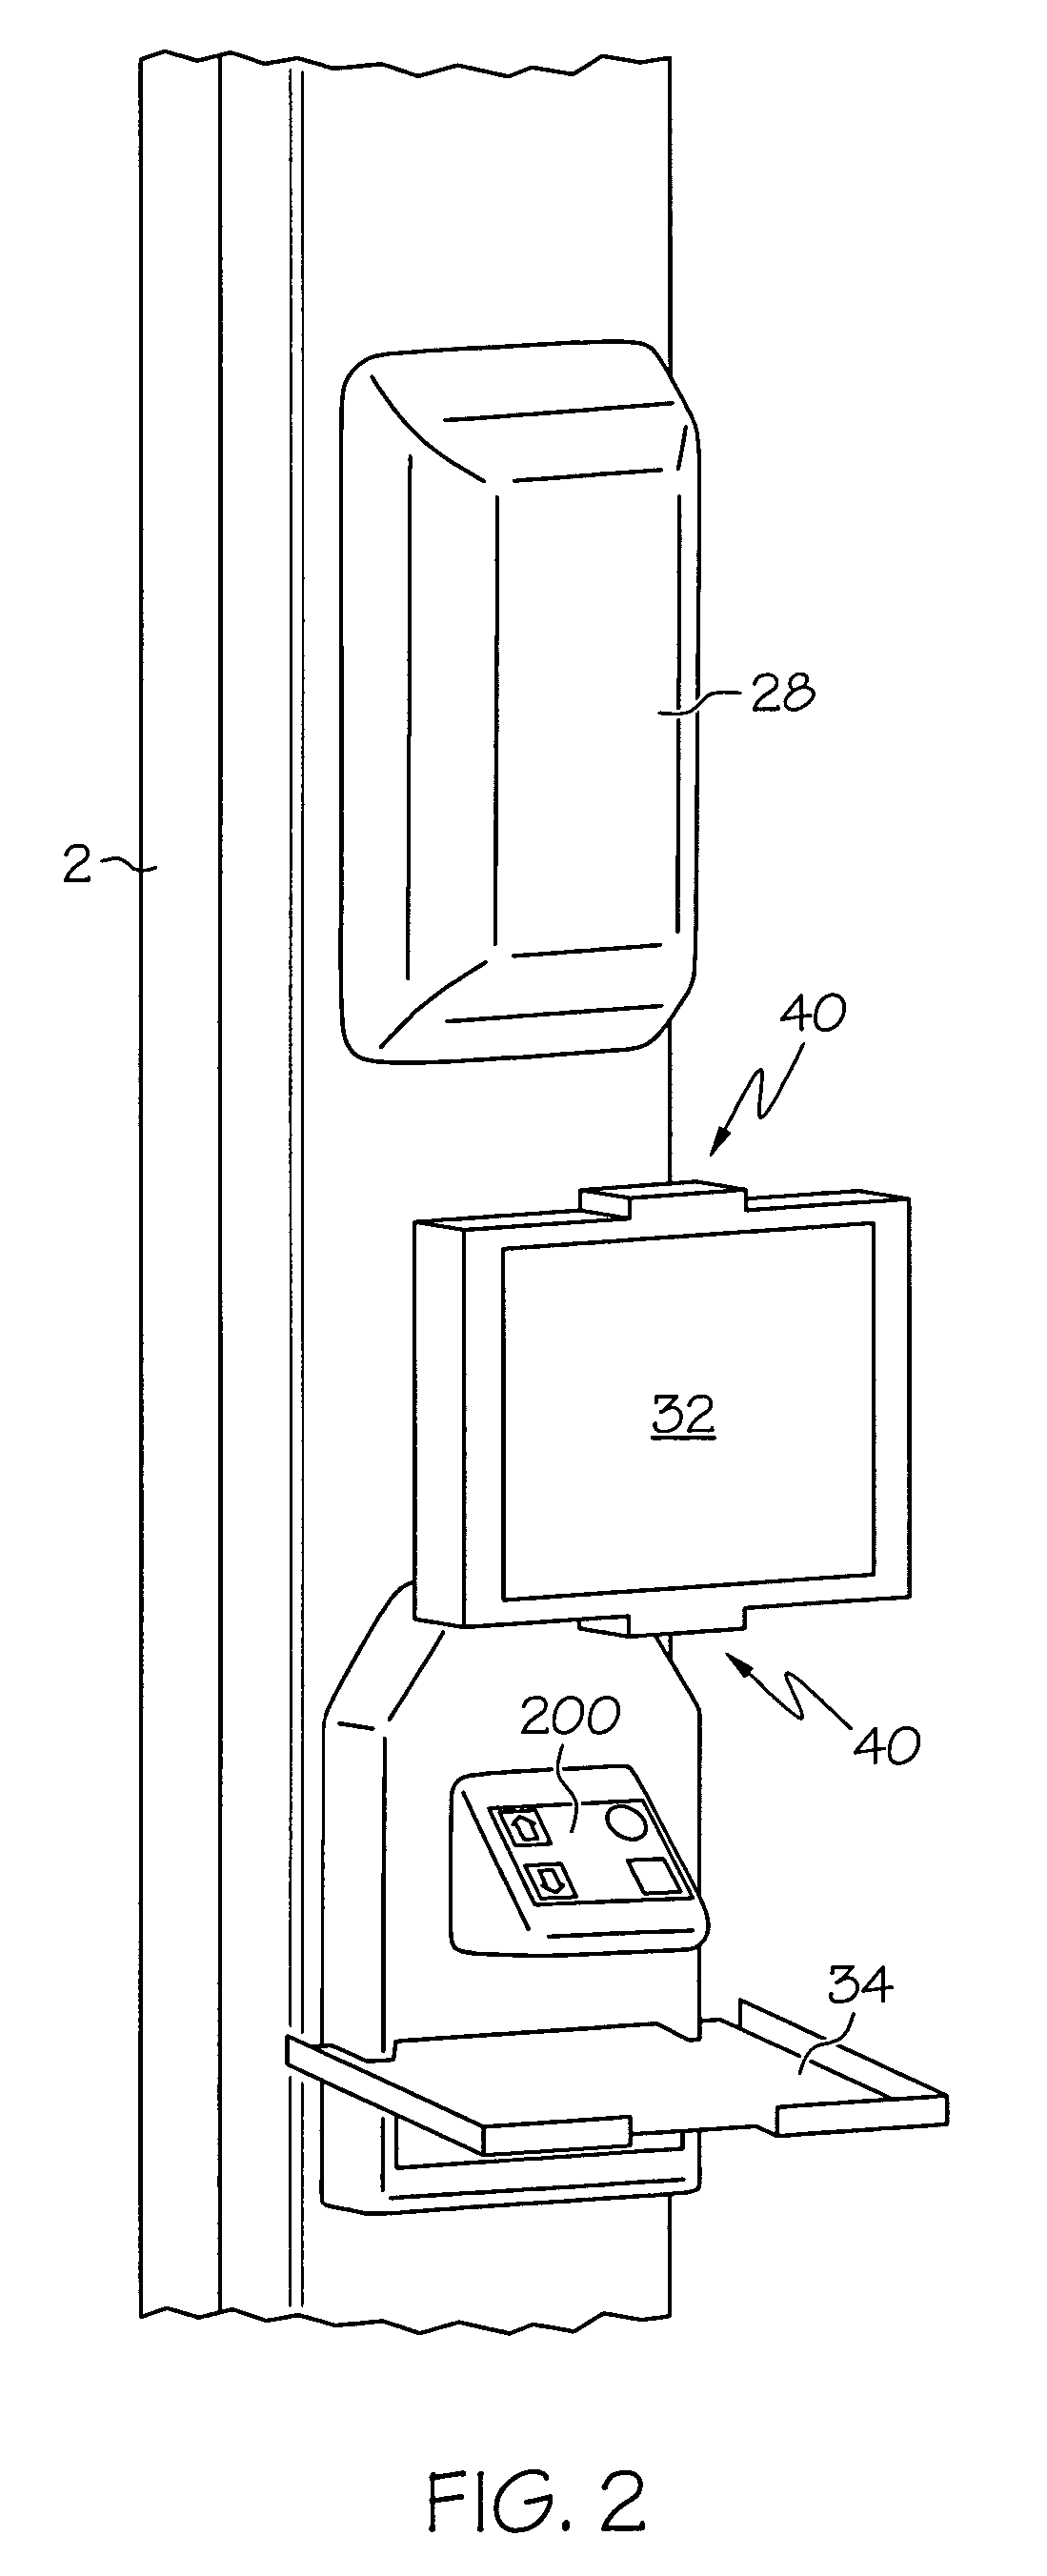 Electronically controlled vehicle lift and vehicle service system